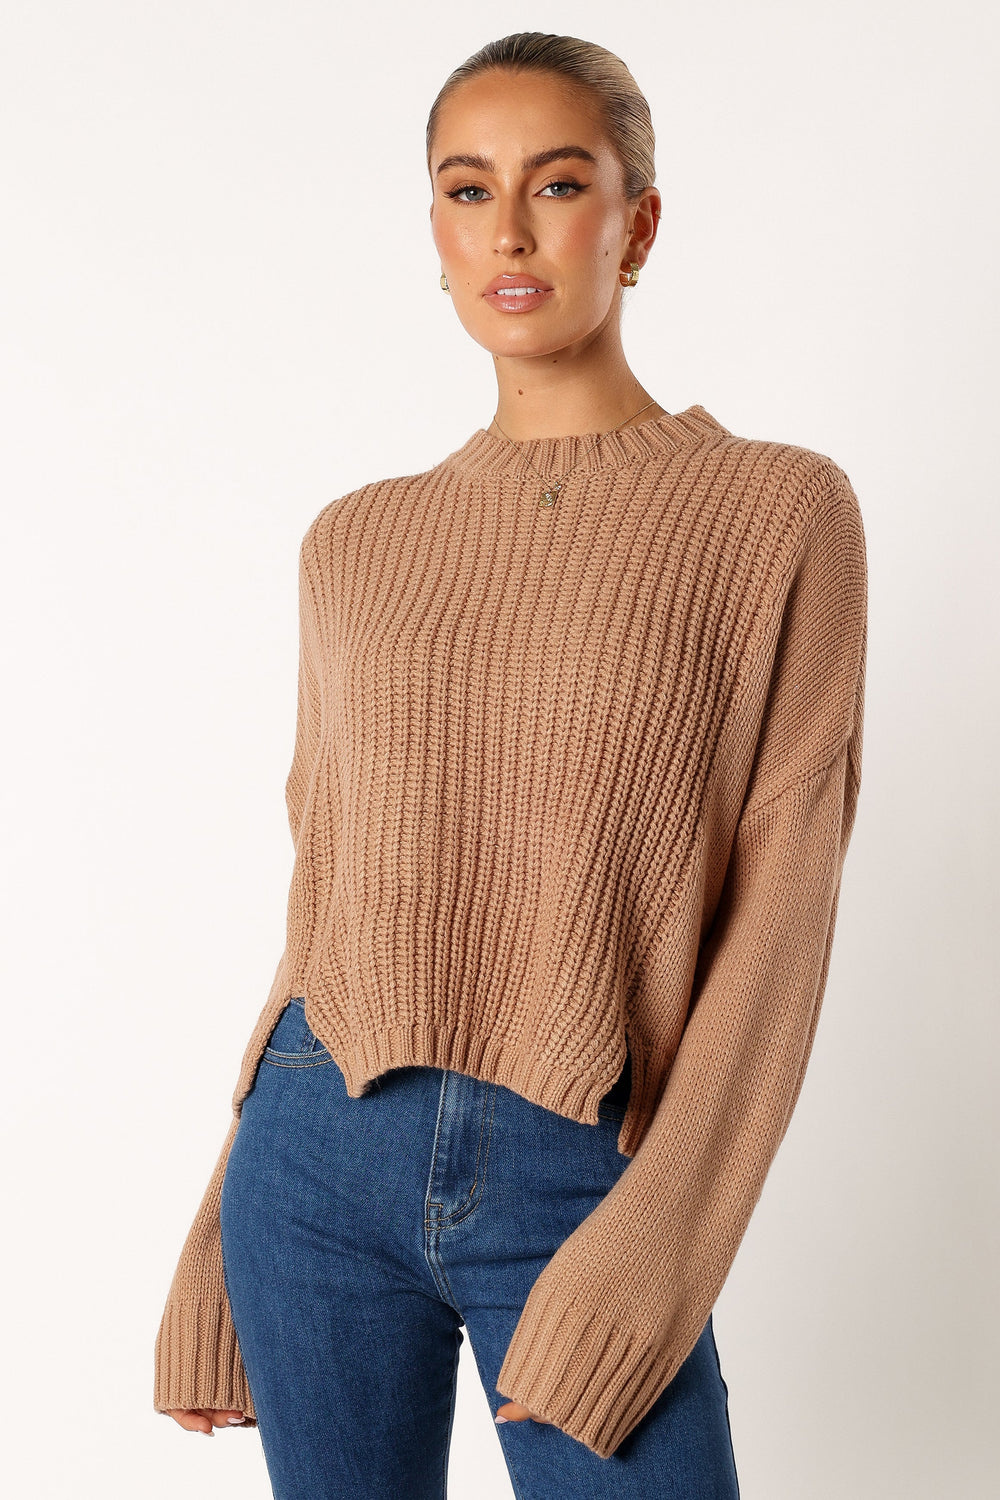 Petal and Pup USA KNITWEAR Arlette Textured Knit Sweater - Stone